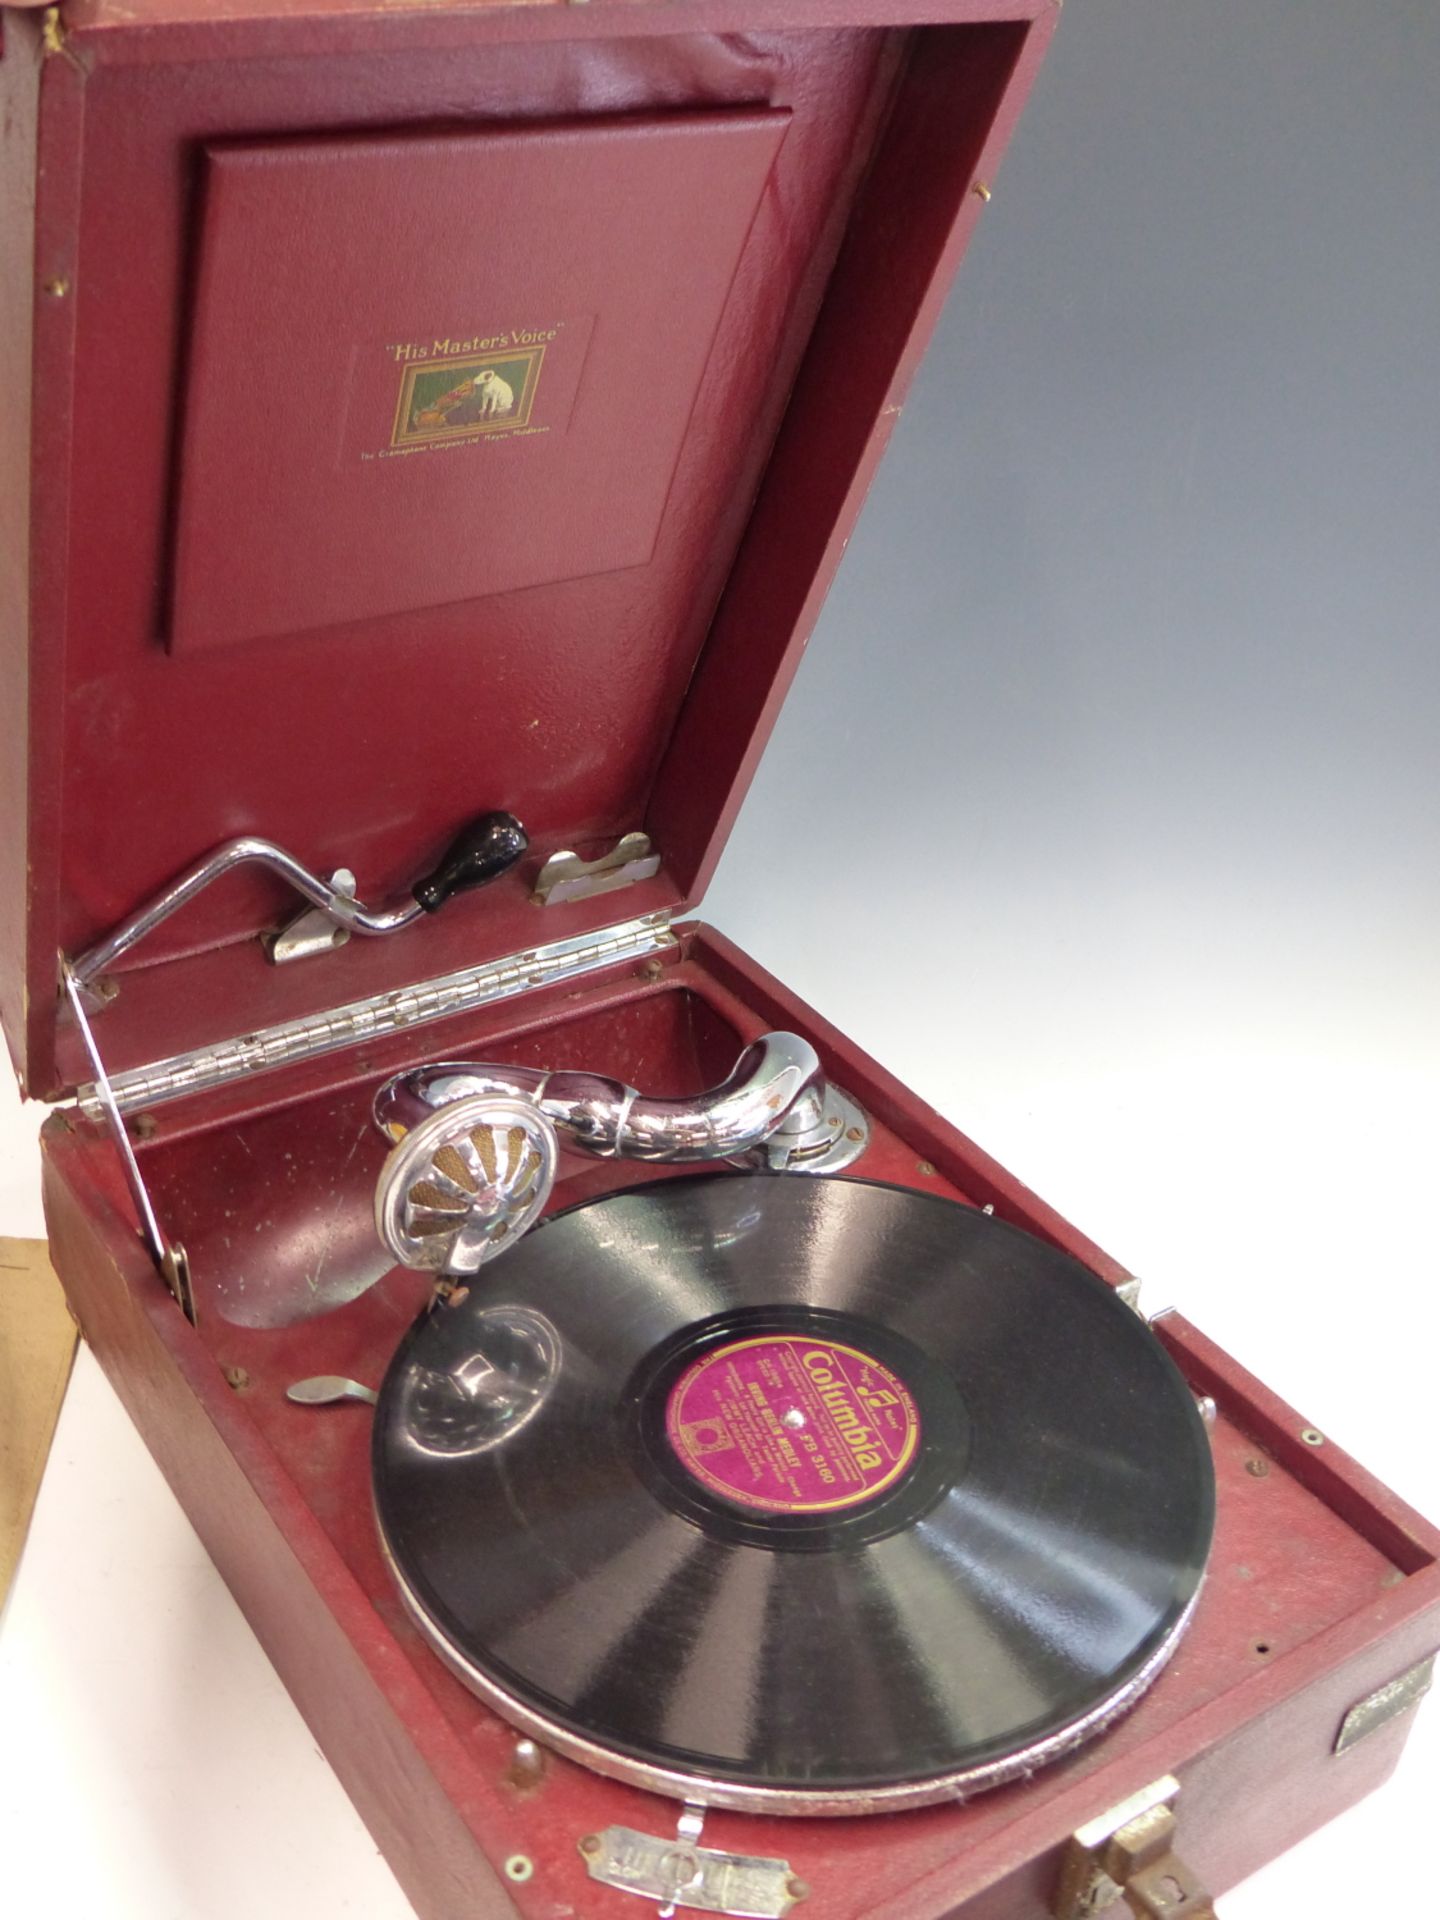 A VINTAGE HMV (HIS MASTERS VOICE) PORTABLE GRAMOPHONE IN RARE RED LETHERETTE COVERED OUTER.